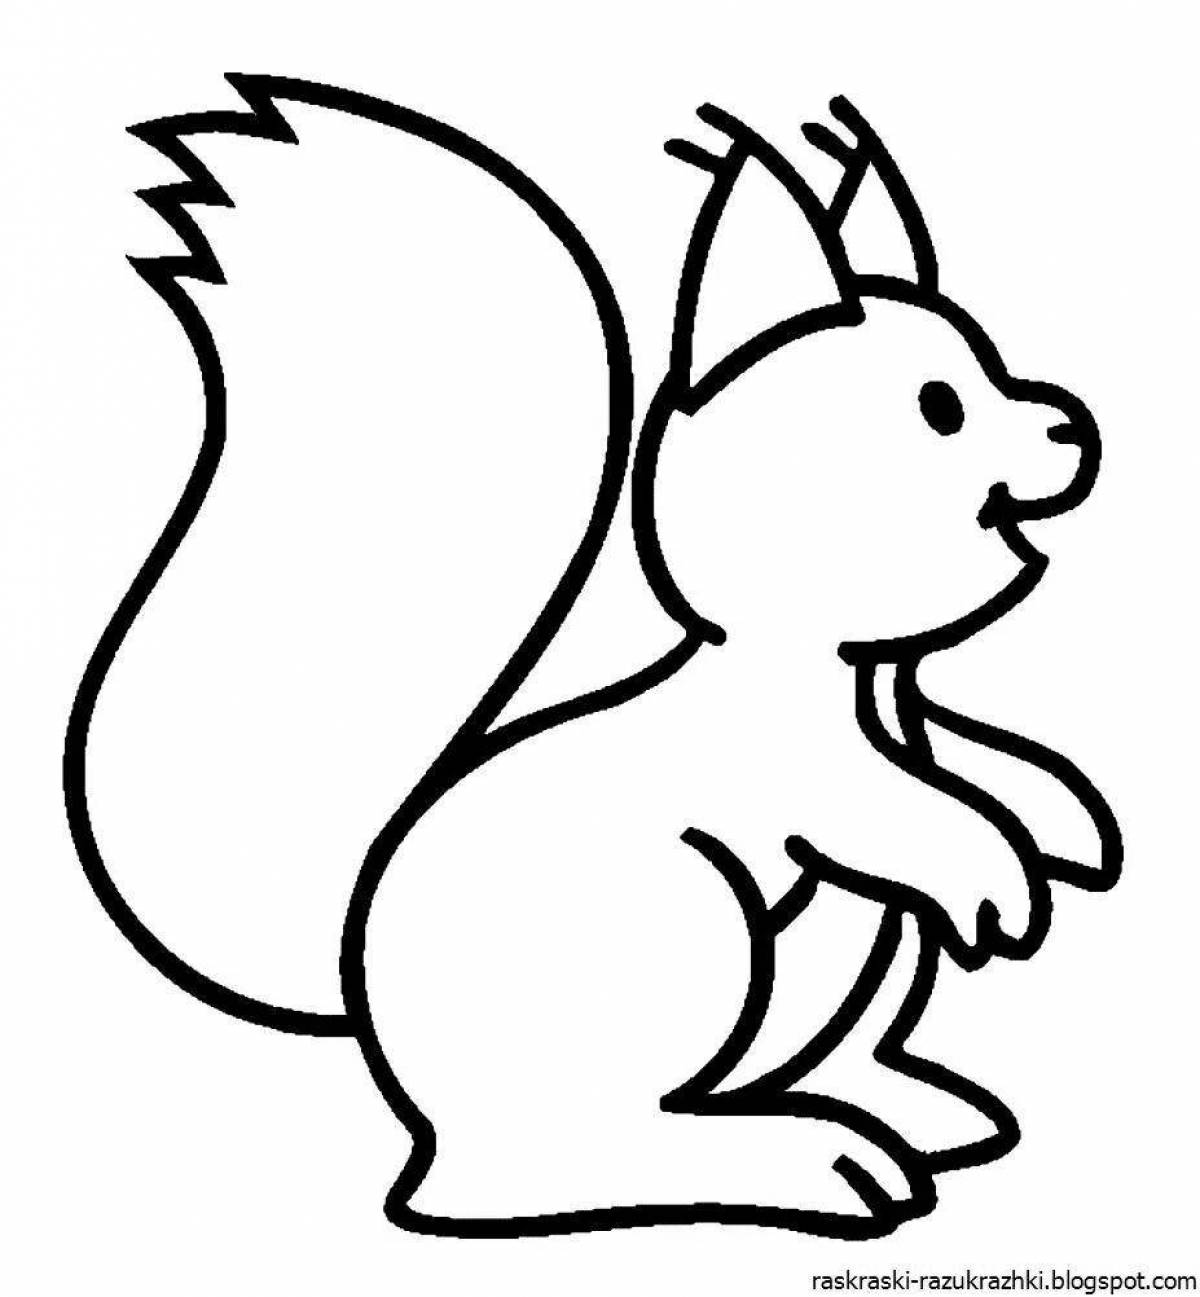 Squirrel live coloring for kids